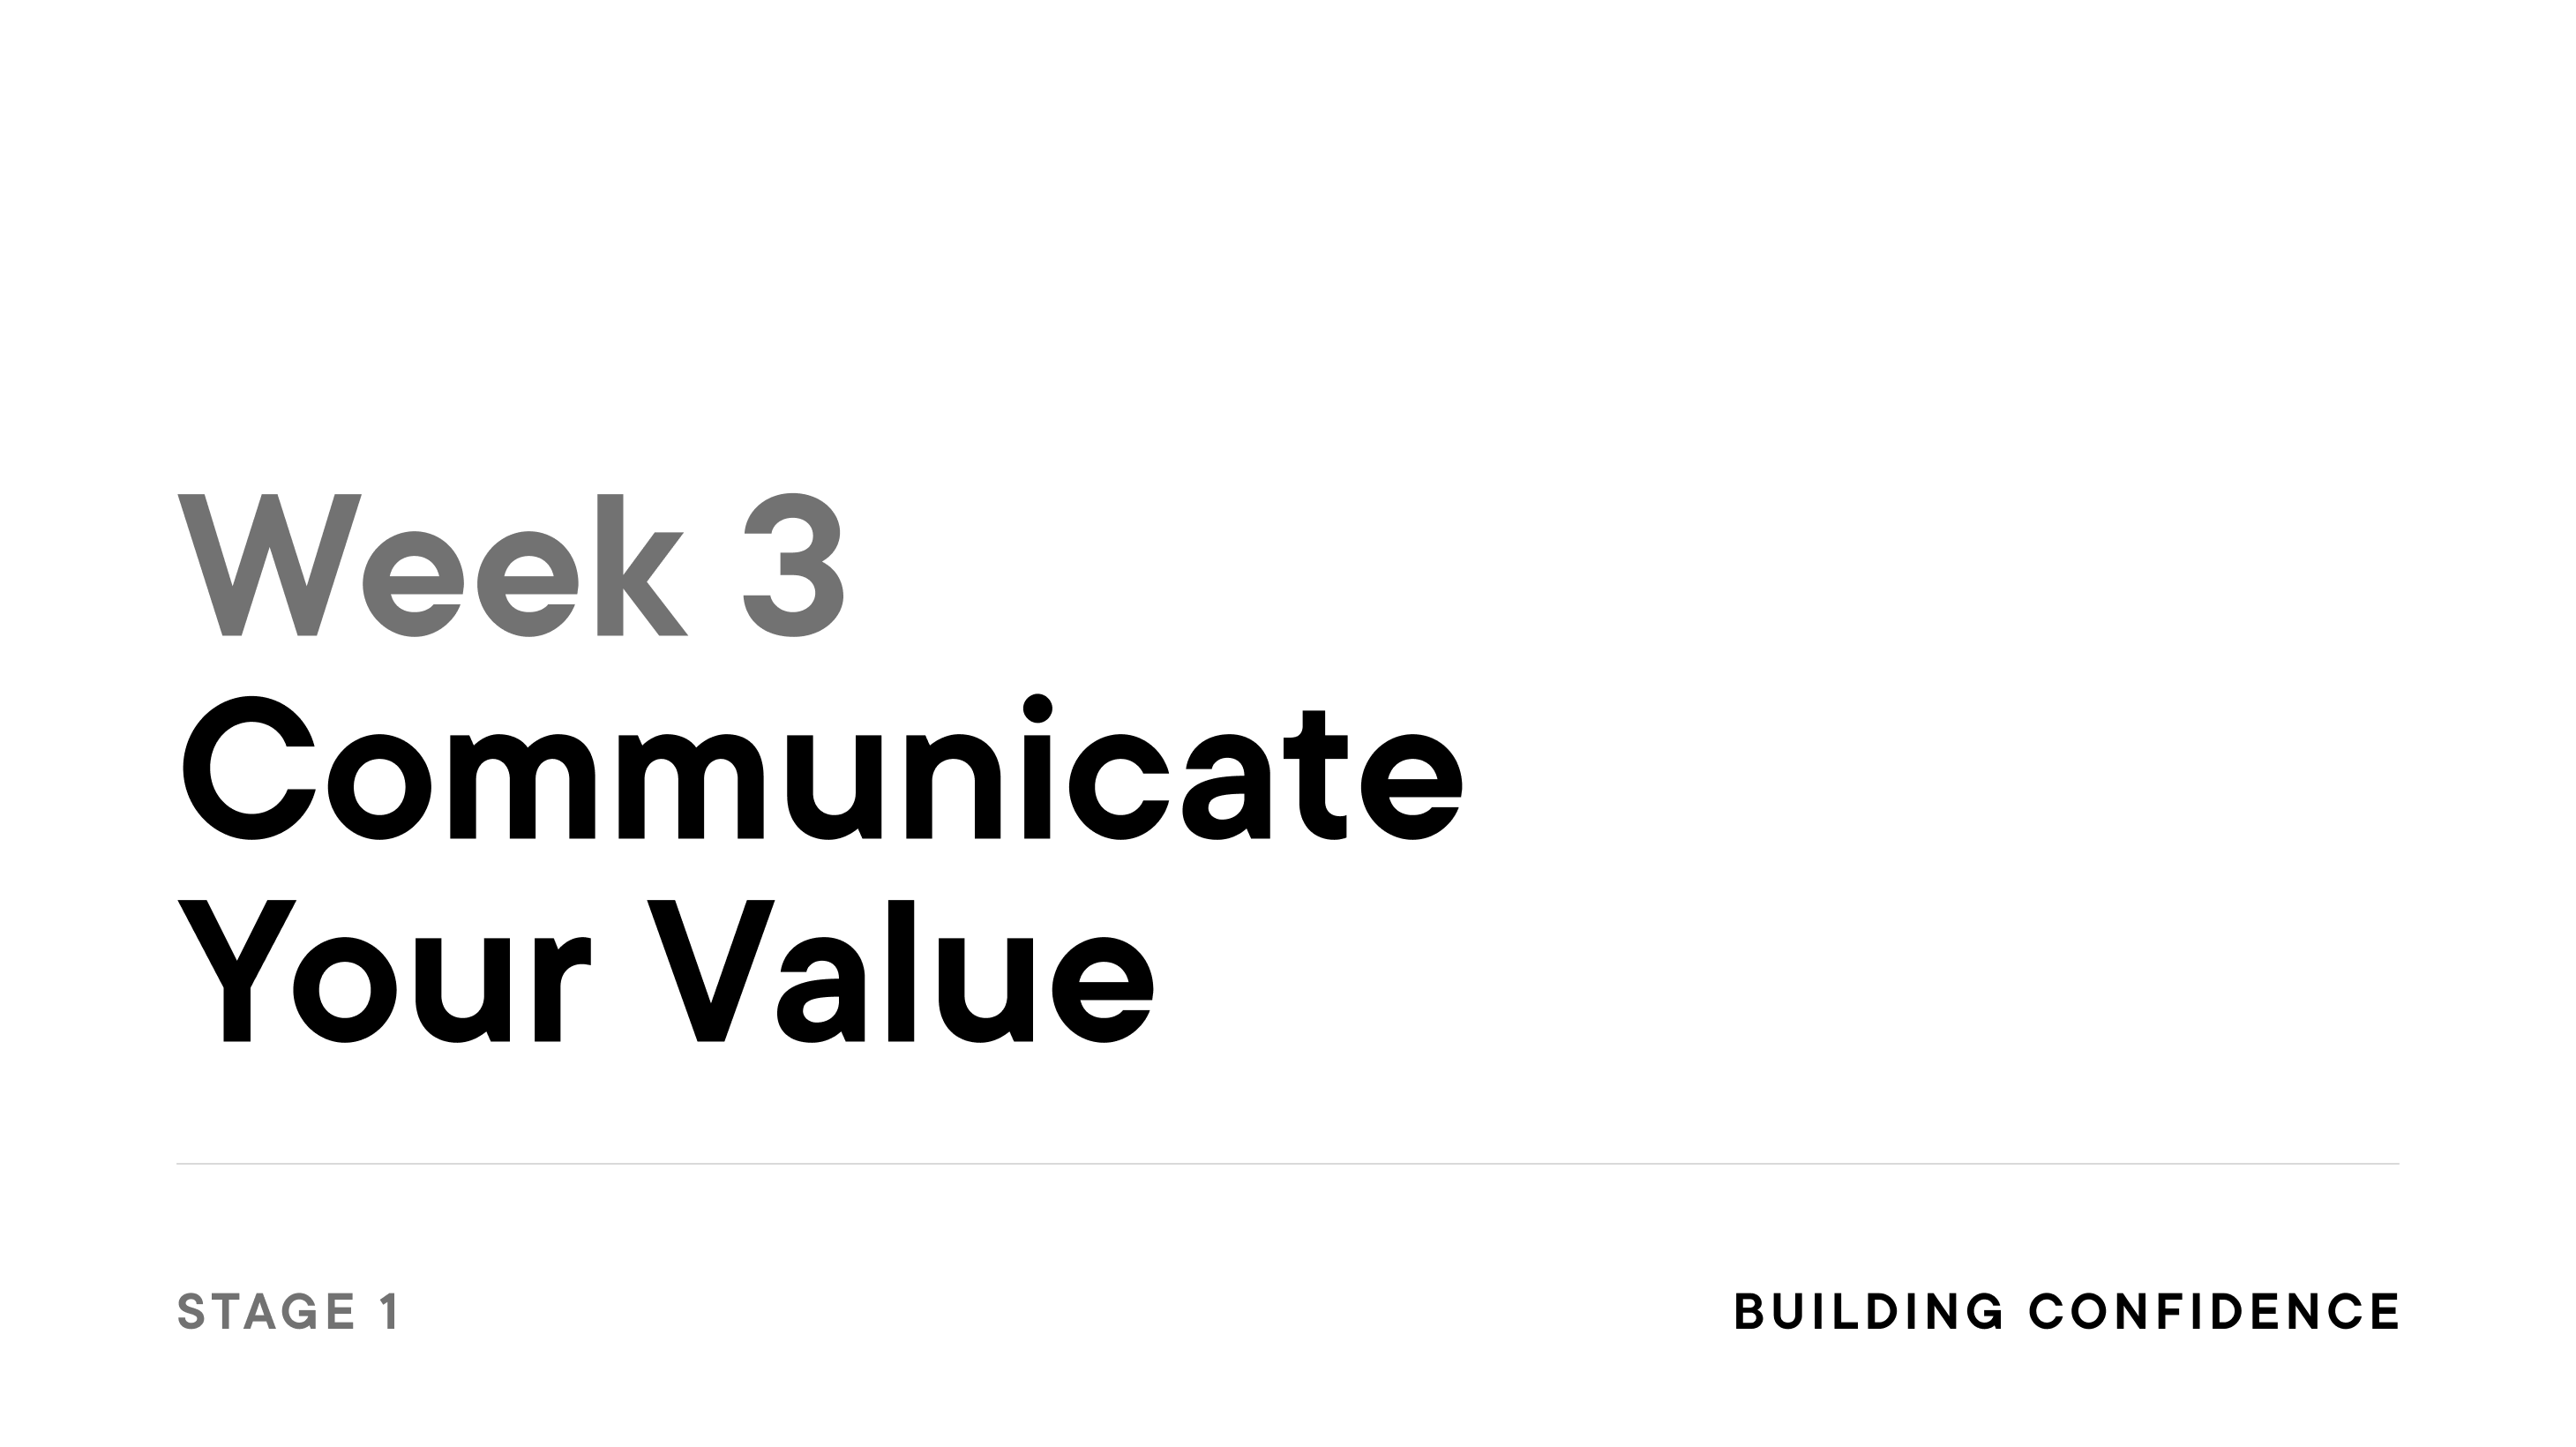 Week 3: Communicate Your Value